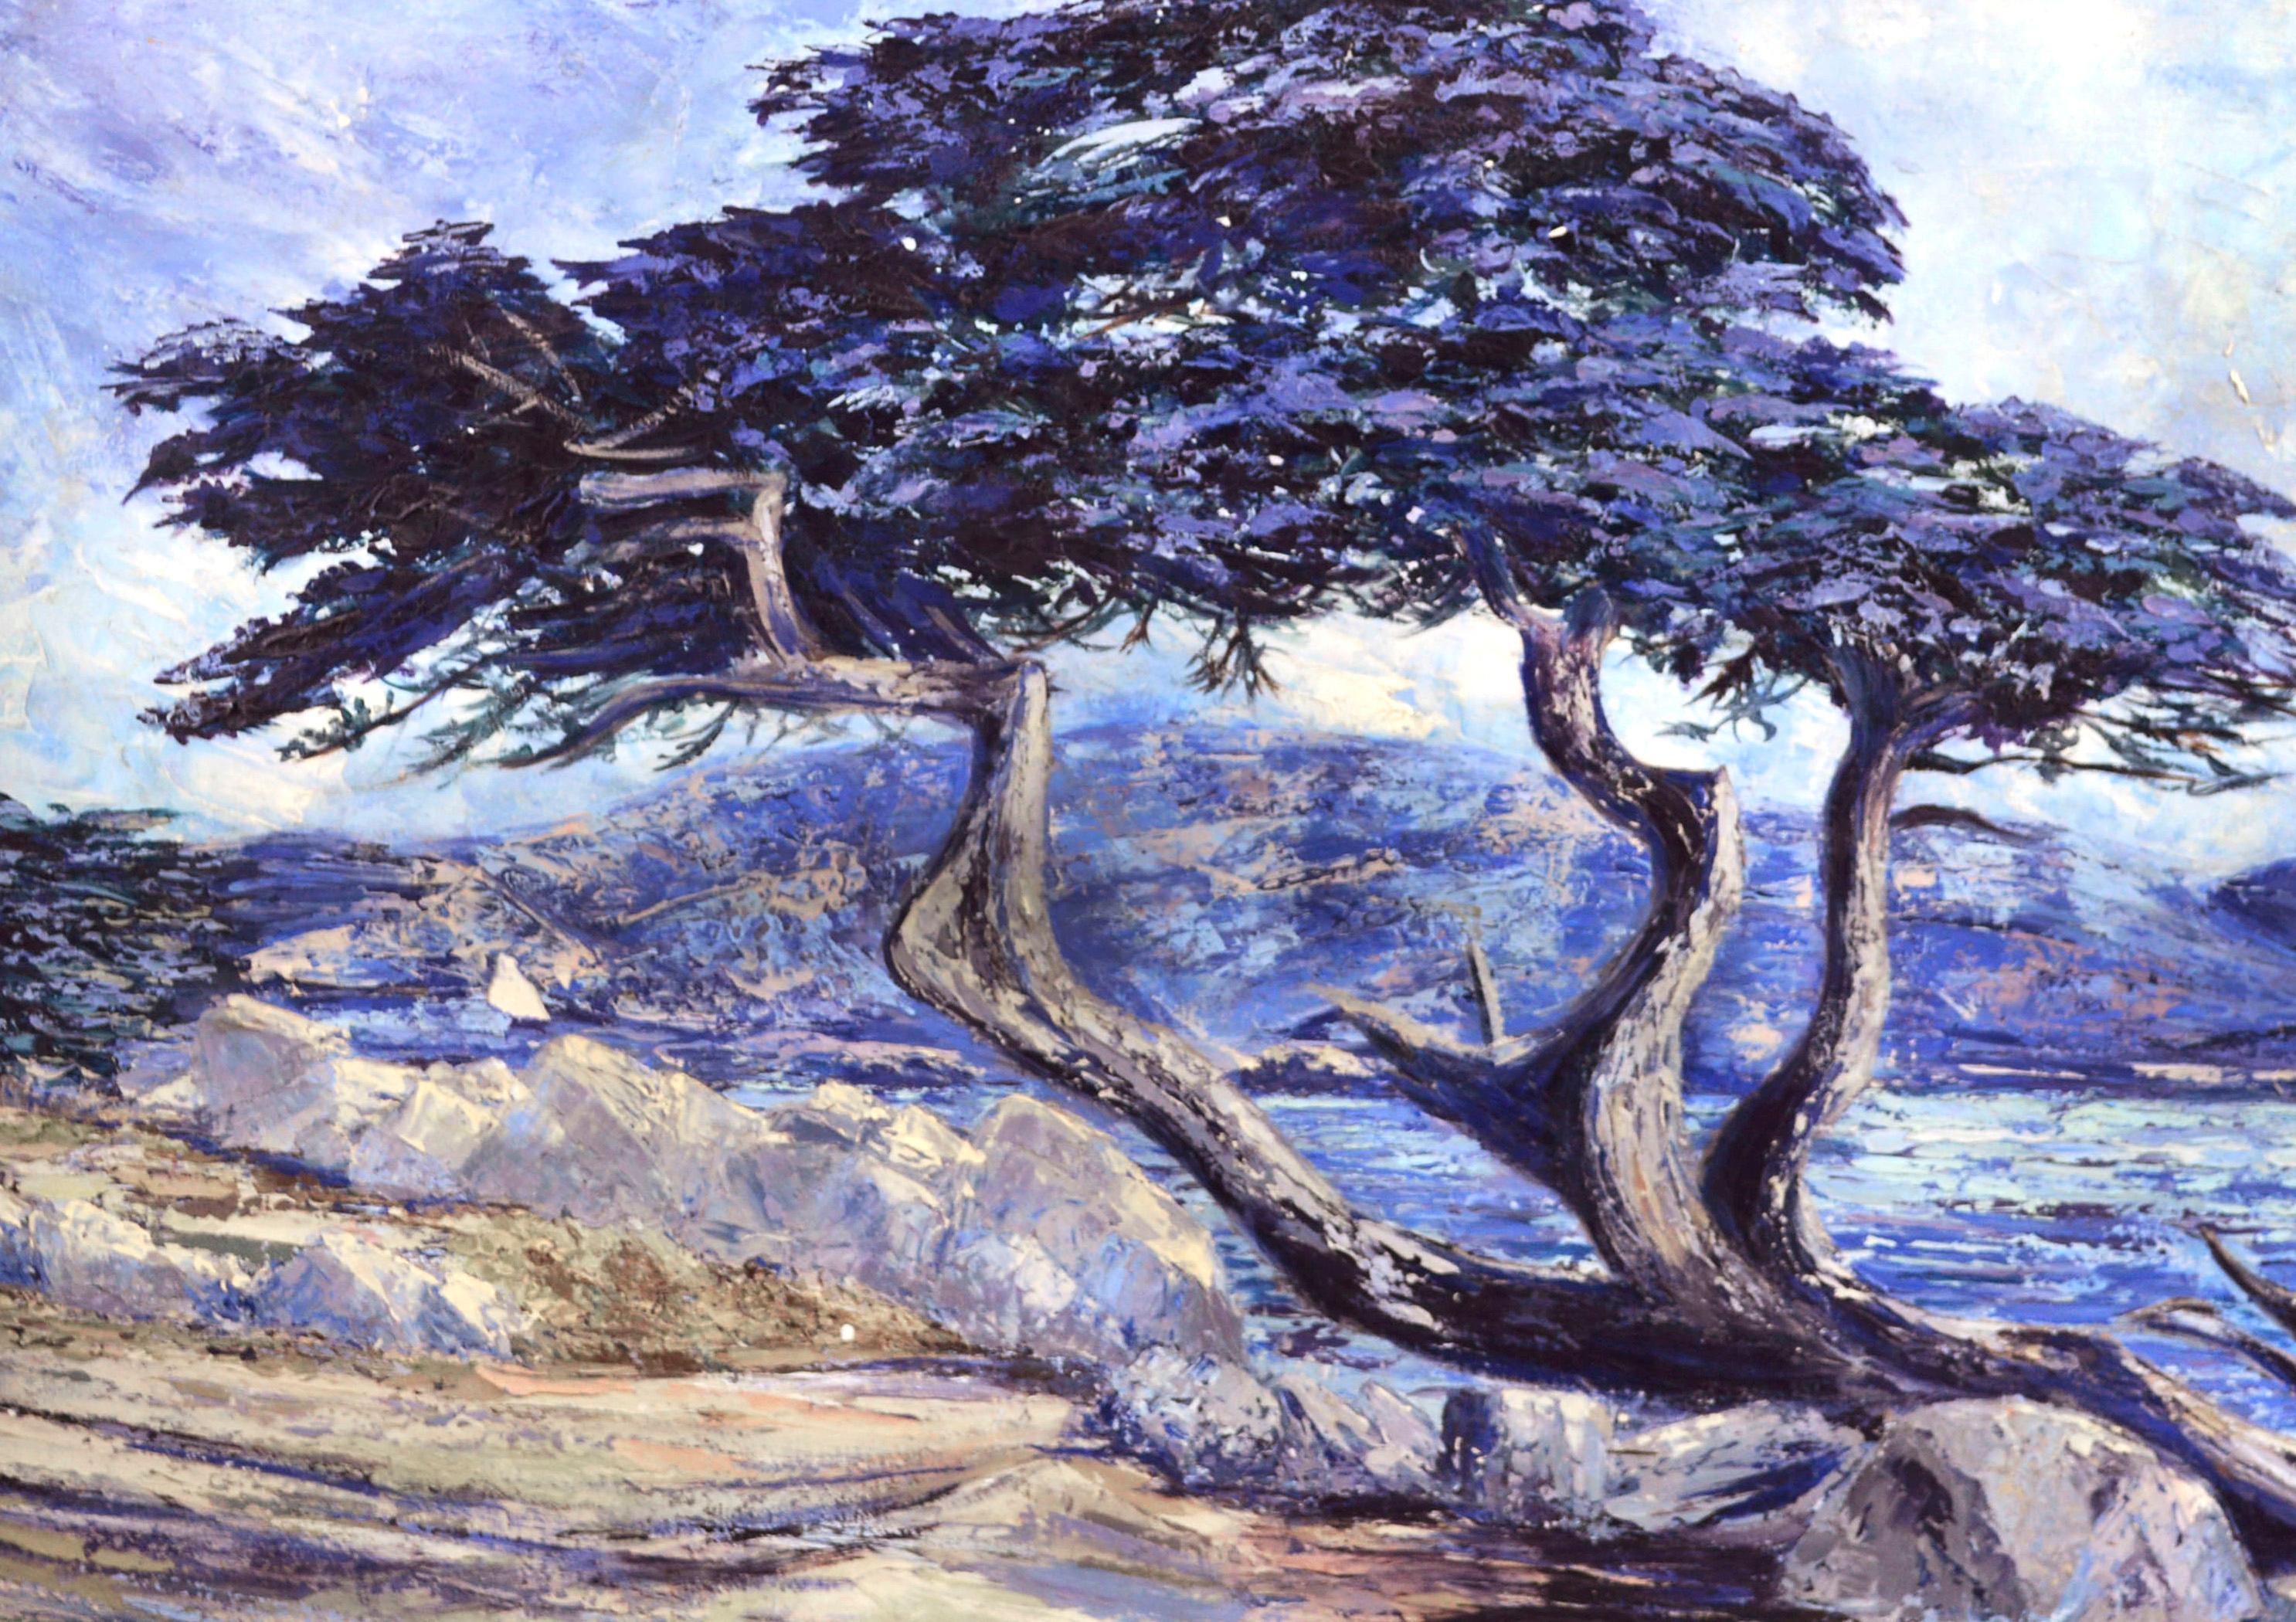 Point Lobos Cypress, Monterey Coastal Landscape with Cypress Tree  - Painting by Virginia Shackles